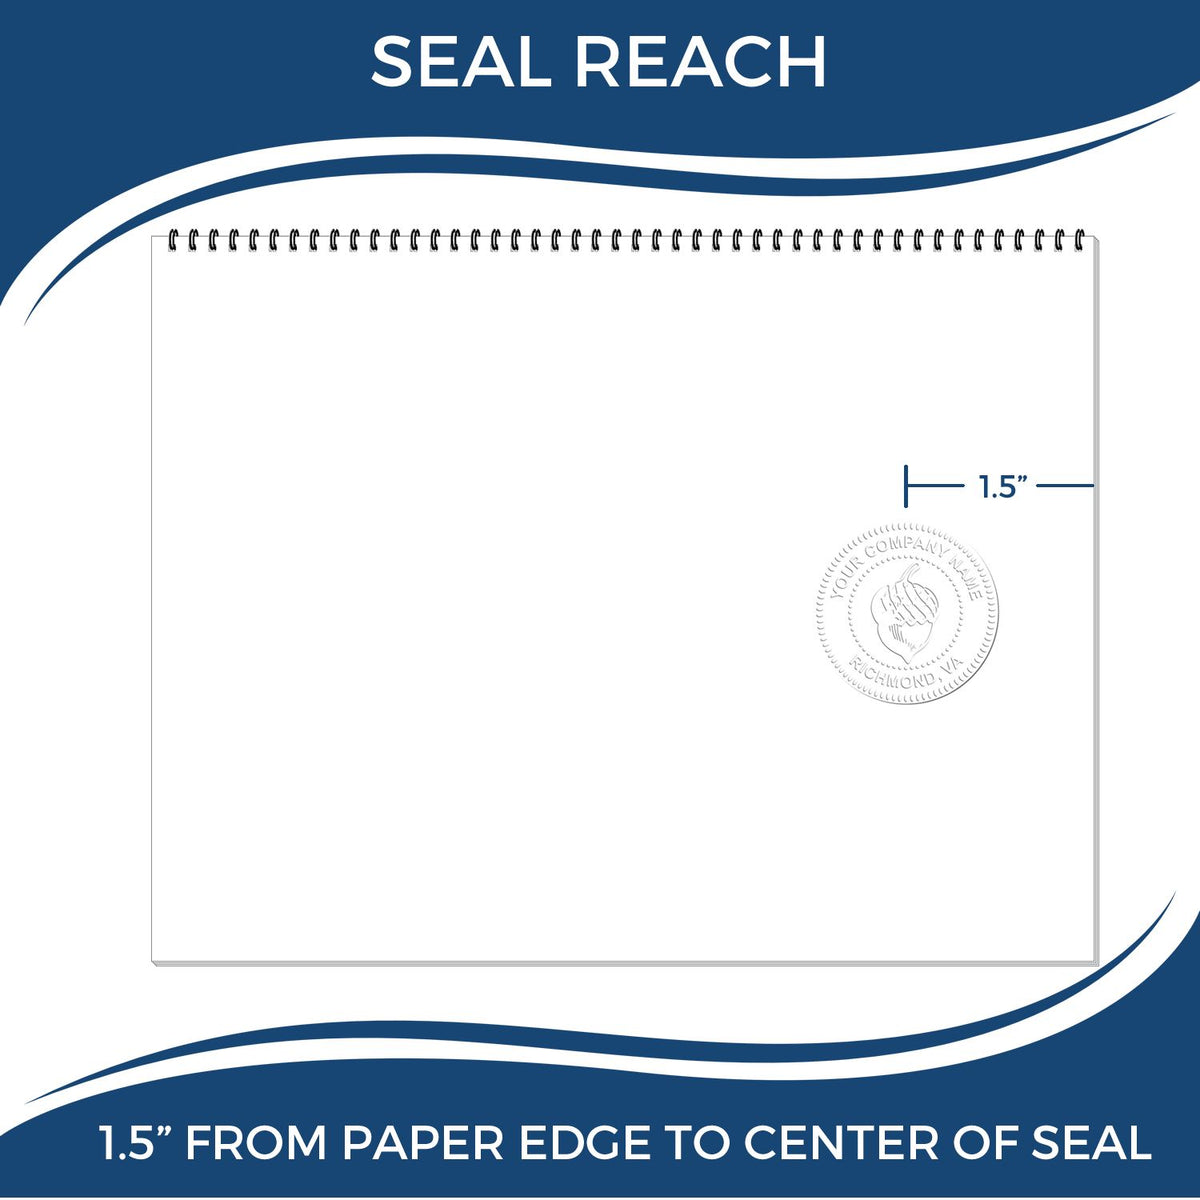 An infographic showing the seal reach which is represented by a ruler and a miniature seal image of the Soft Pocket Vermont Landscape Architect Embosser